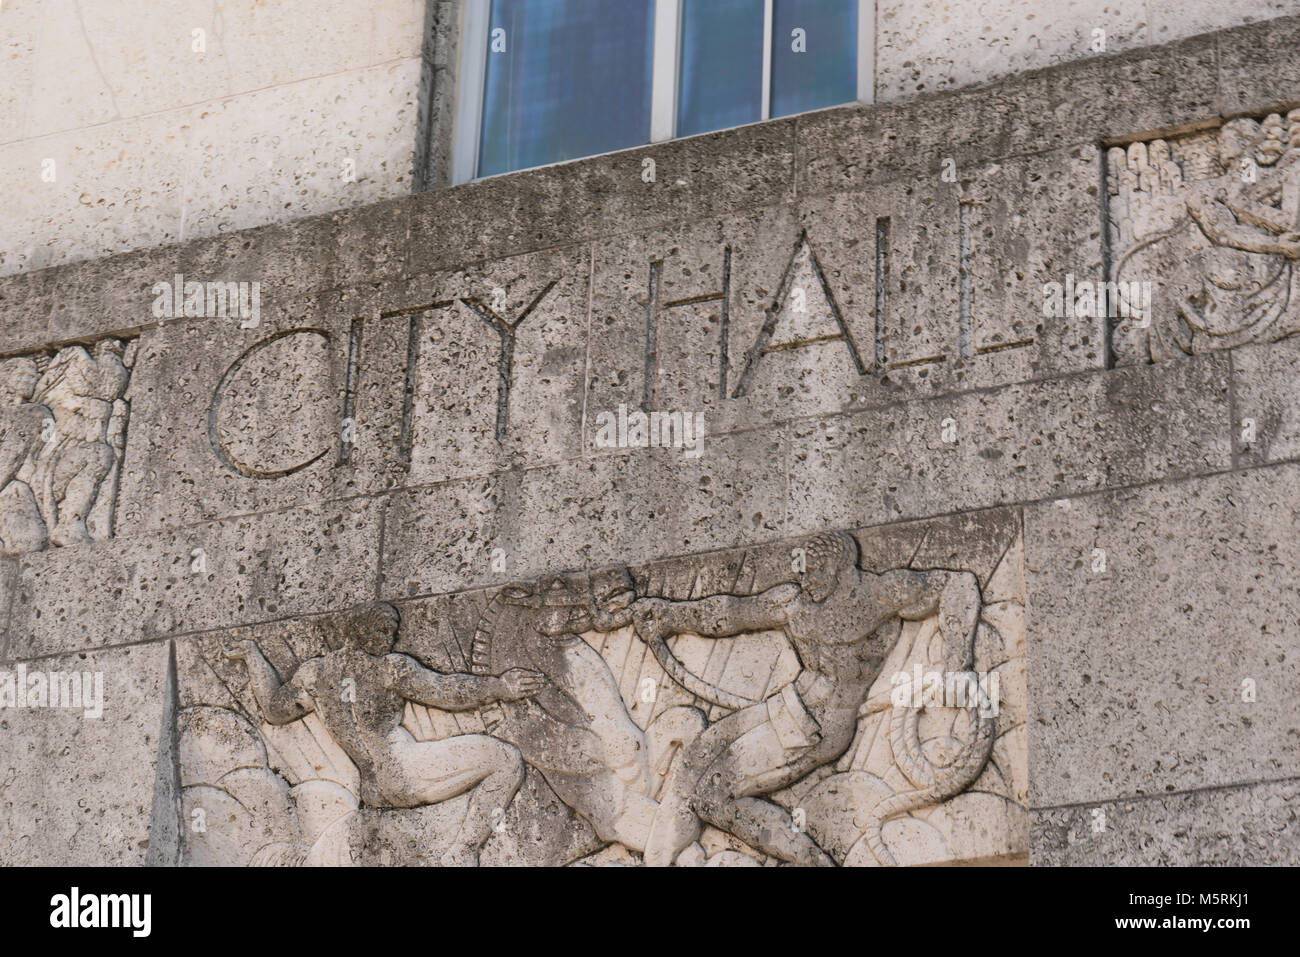 City Hall sign on the front facade of building Stock Photo